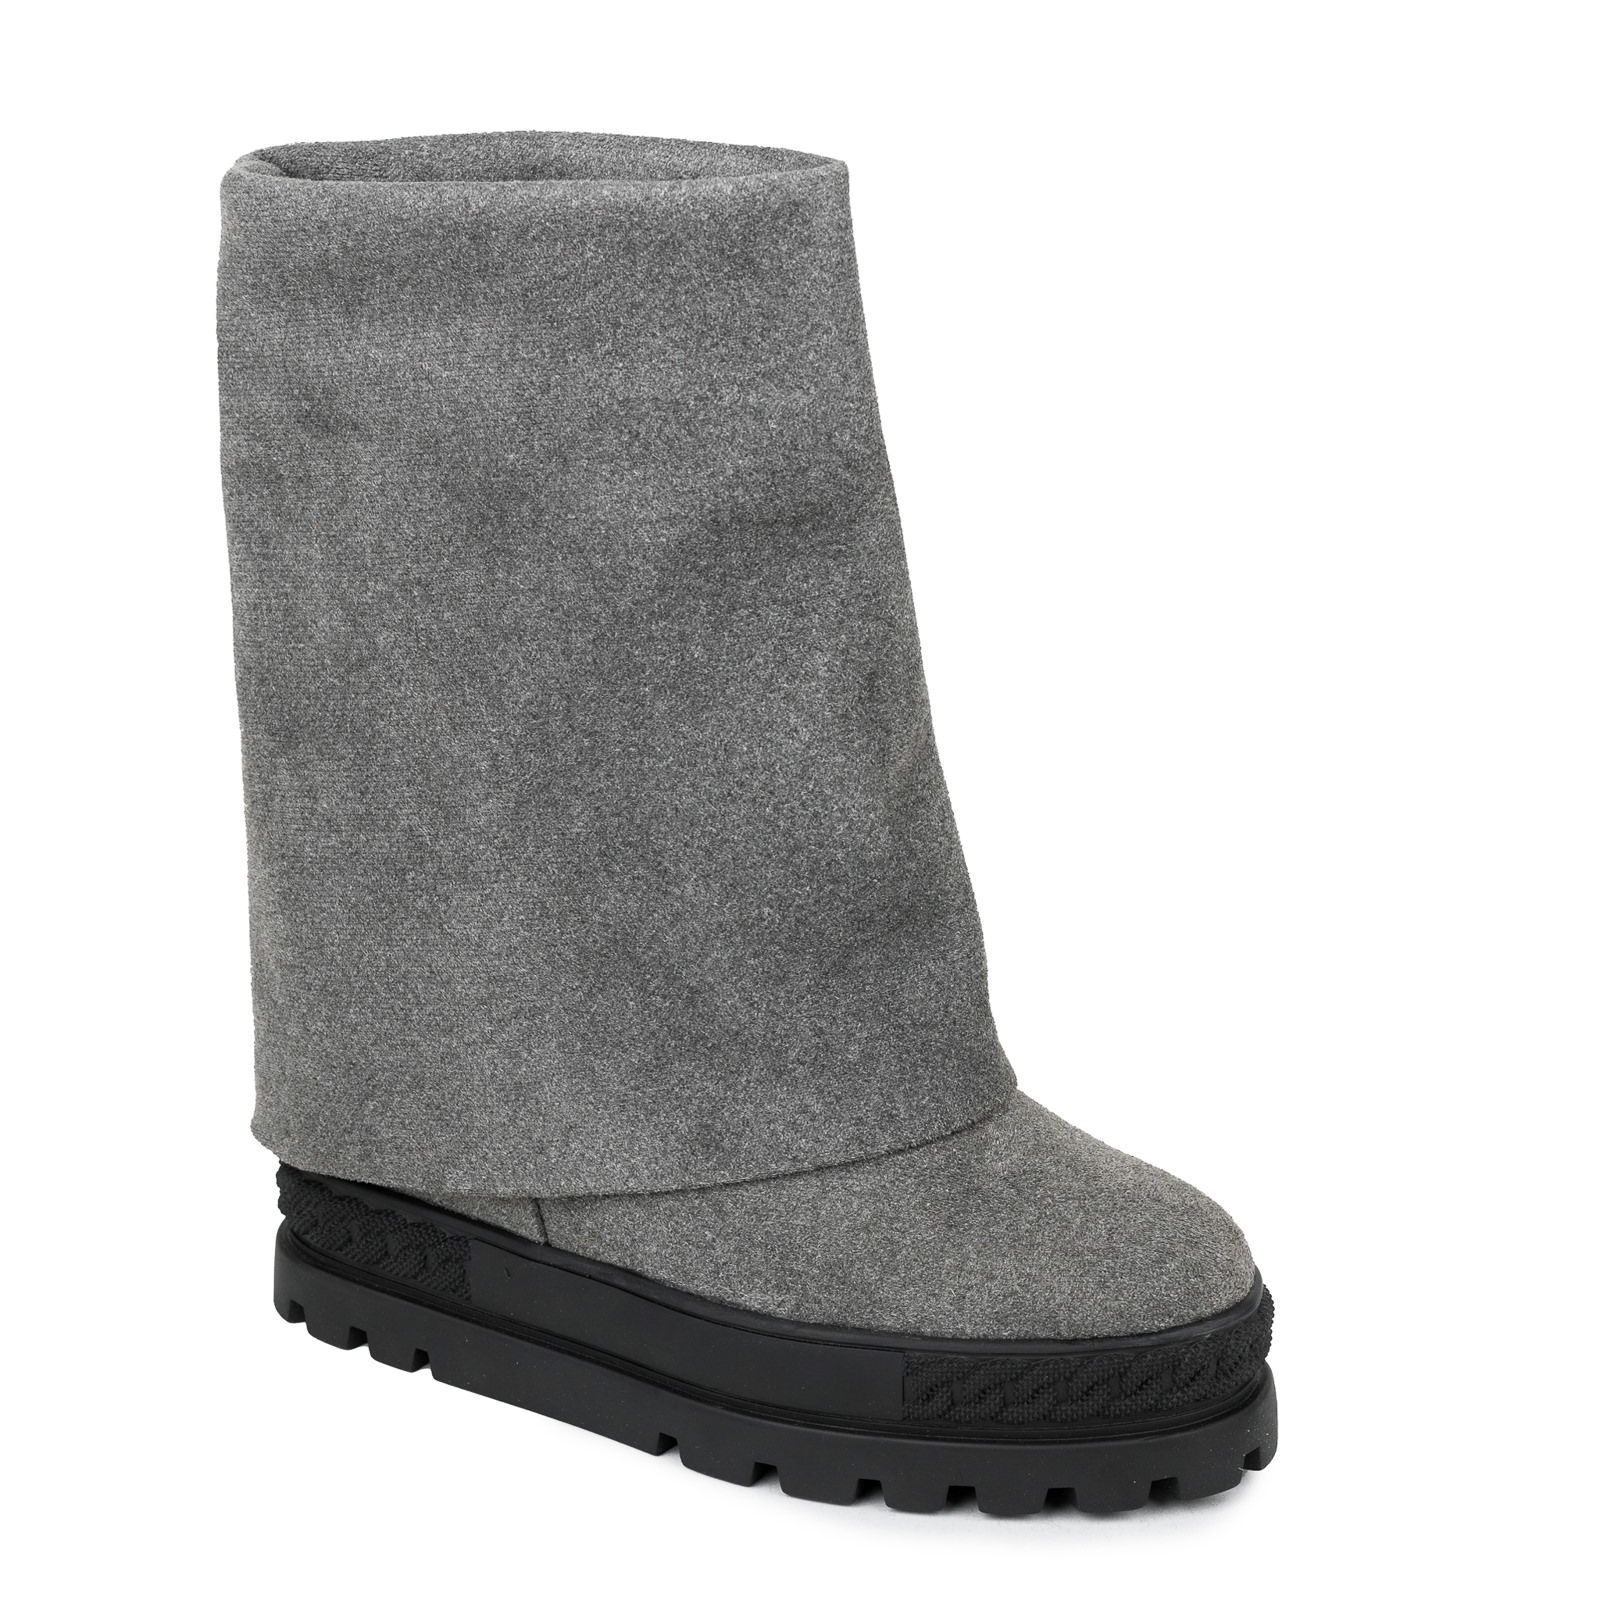 Women ankle boots B426 - GREY